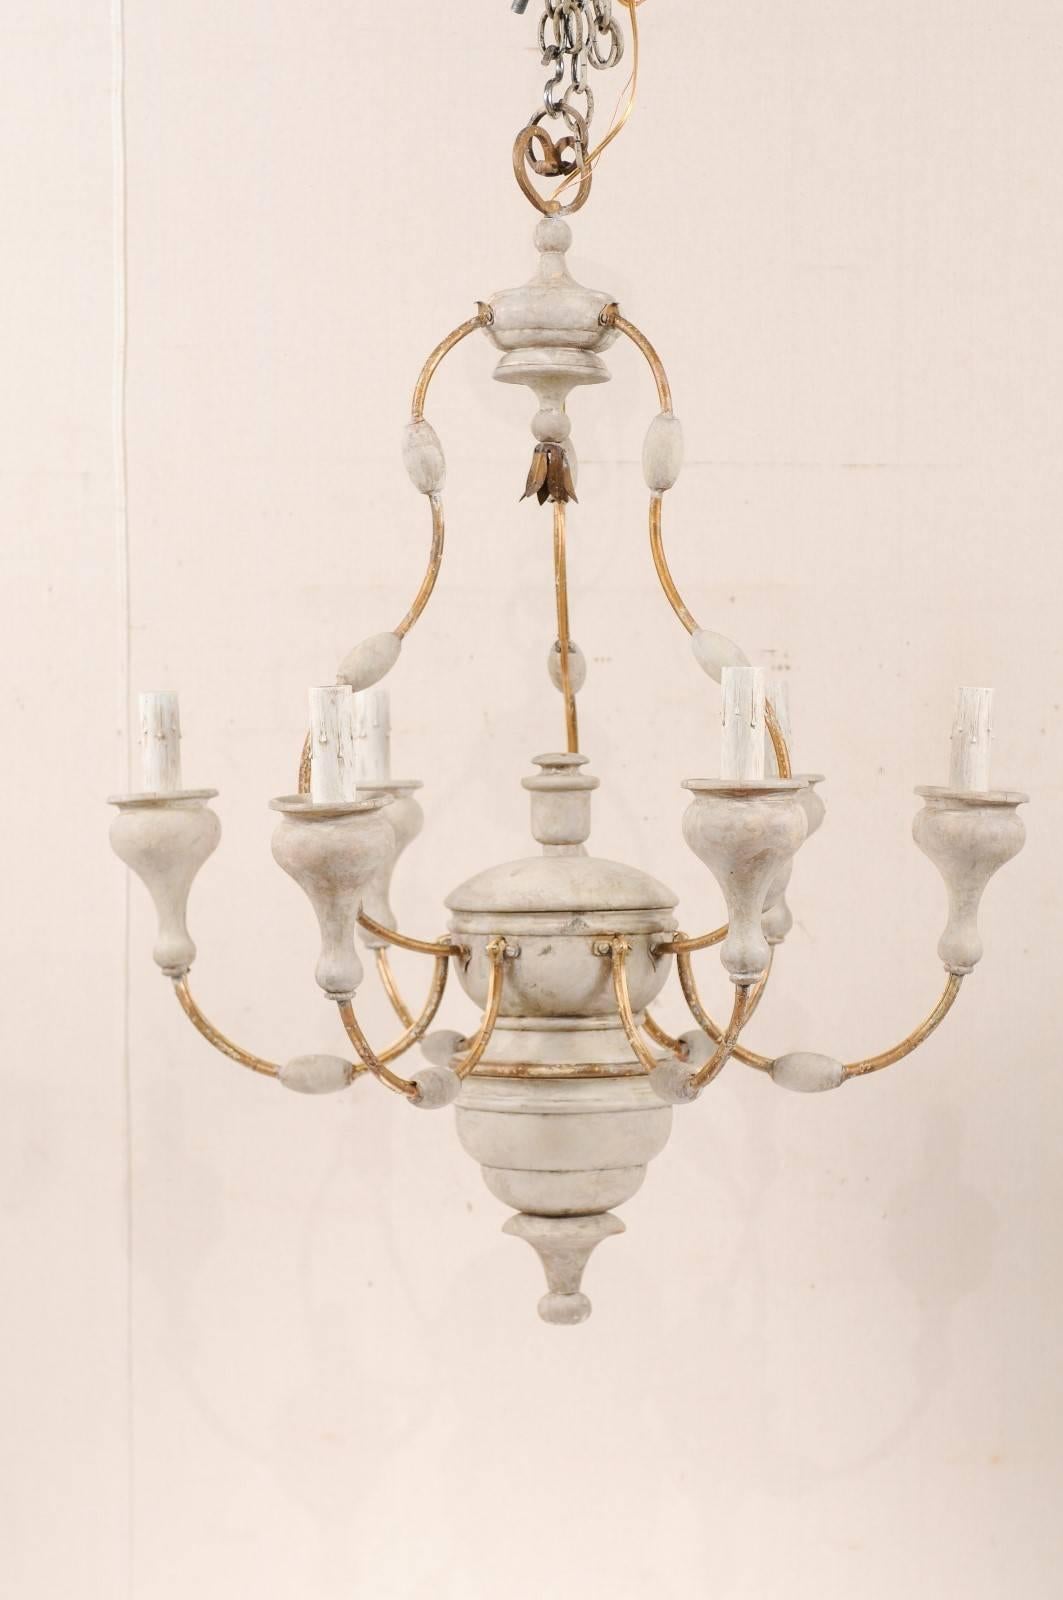 An Italian six-light painted wood and metal chandelier. This good sized mid-20th century Italian chandelier features a carved and painted wood column with metal swag arms extending out from the centre. Each arm metal arm features an oblong bead